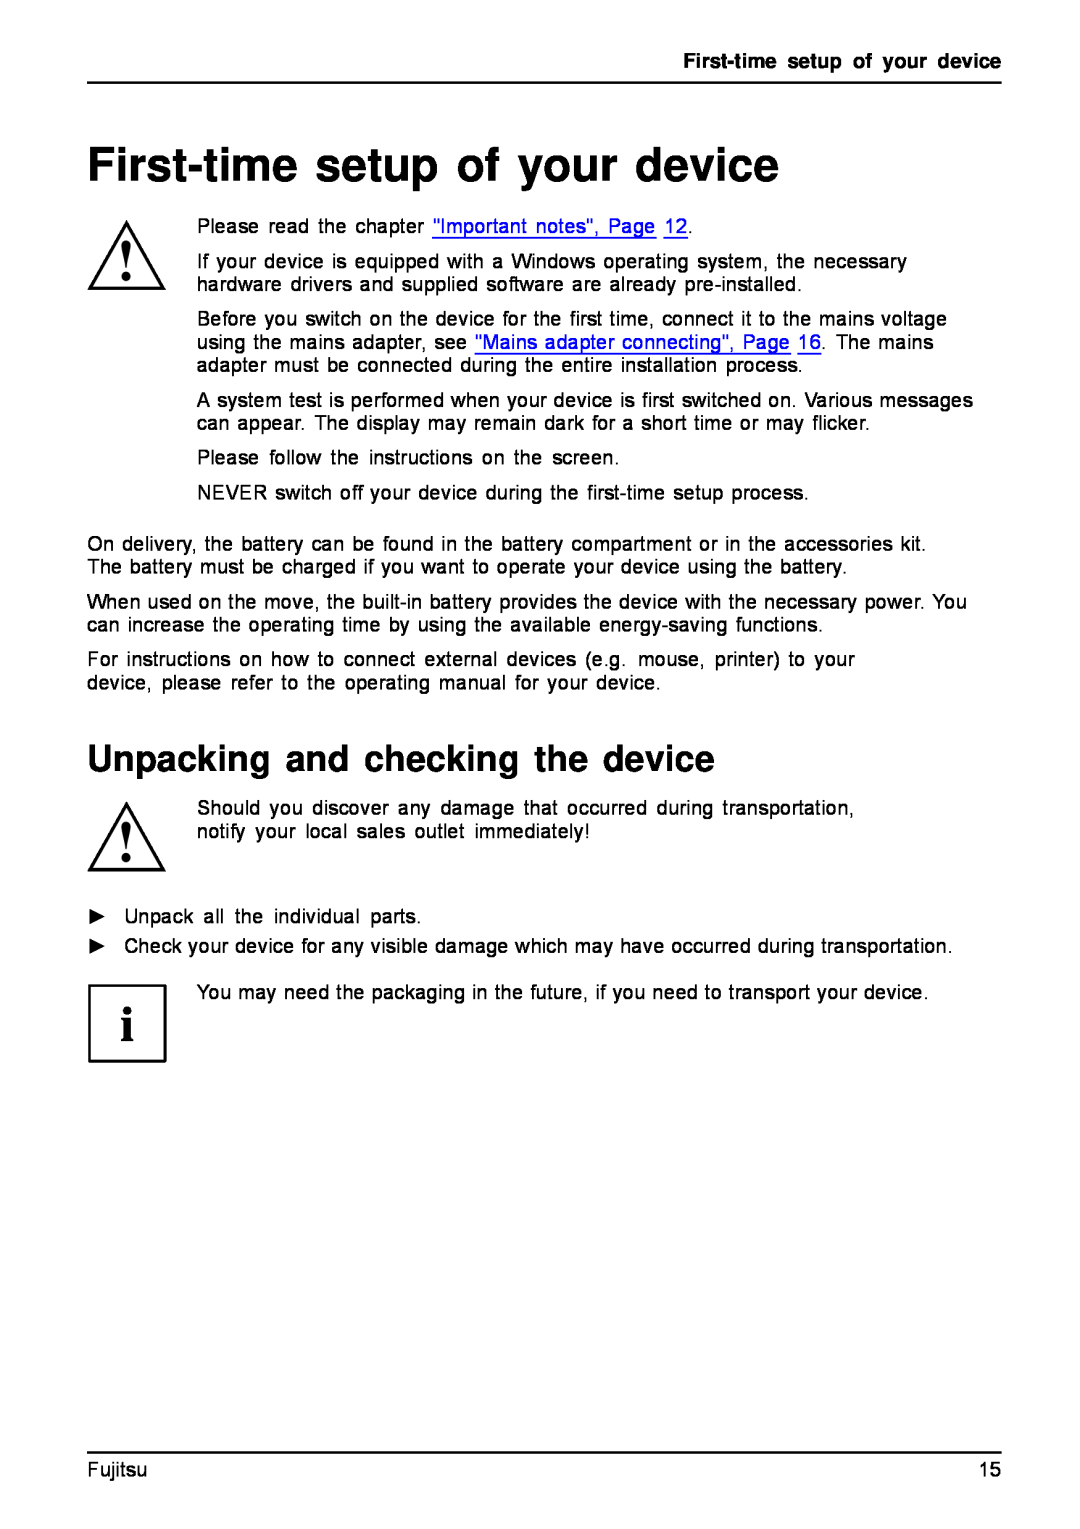 Fujitsu A512, AH512 manual First-time setup of your device, Unpacking and checking the device 